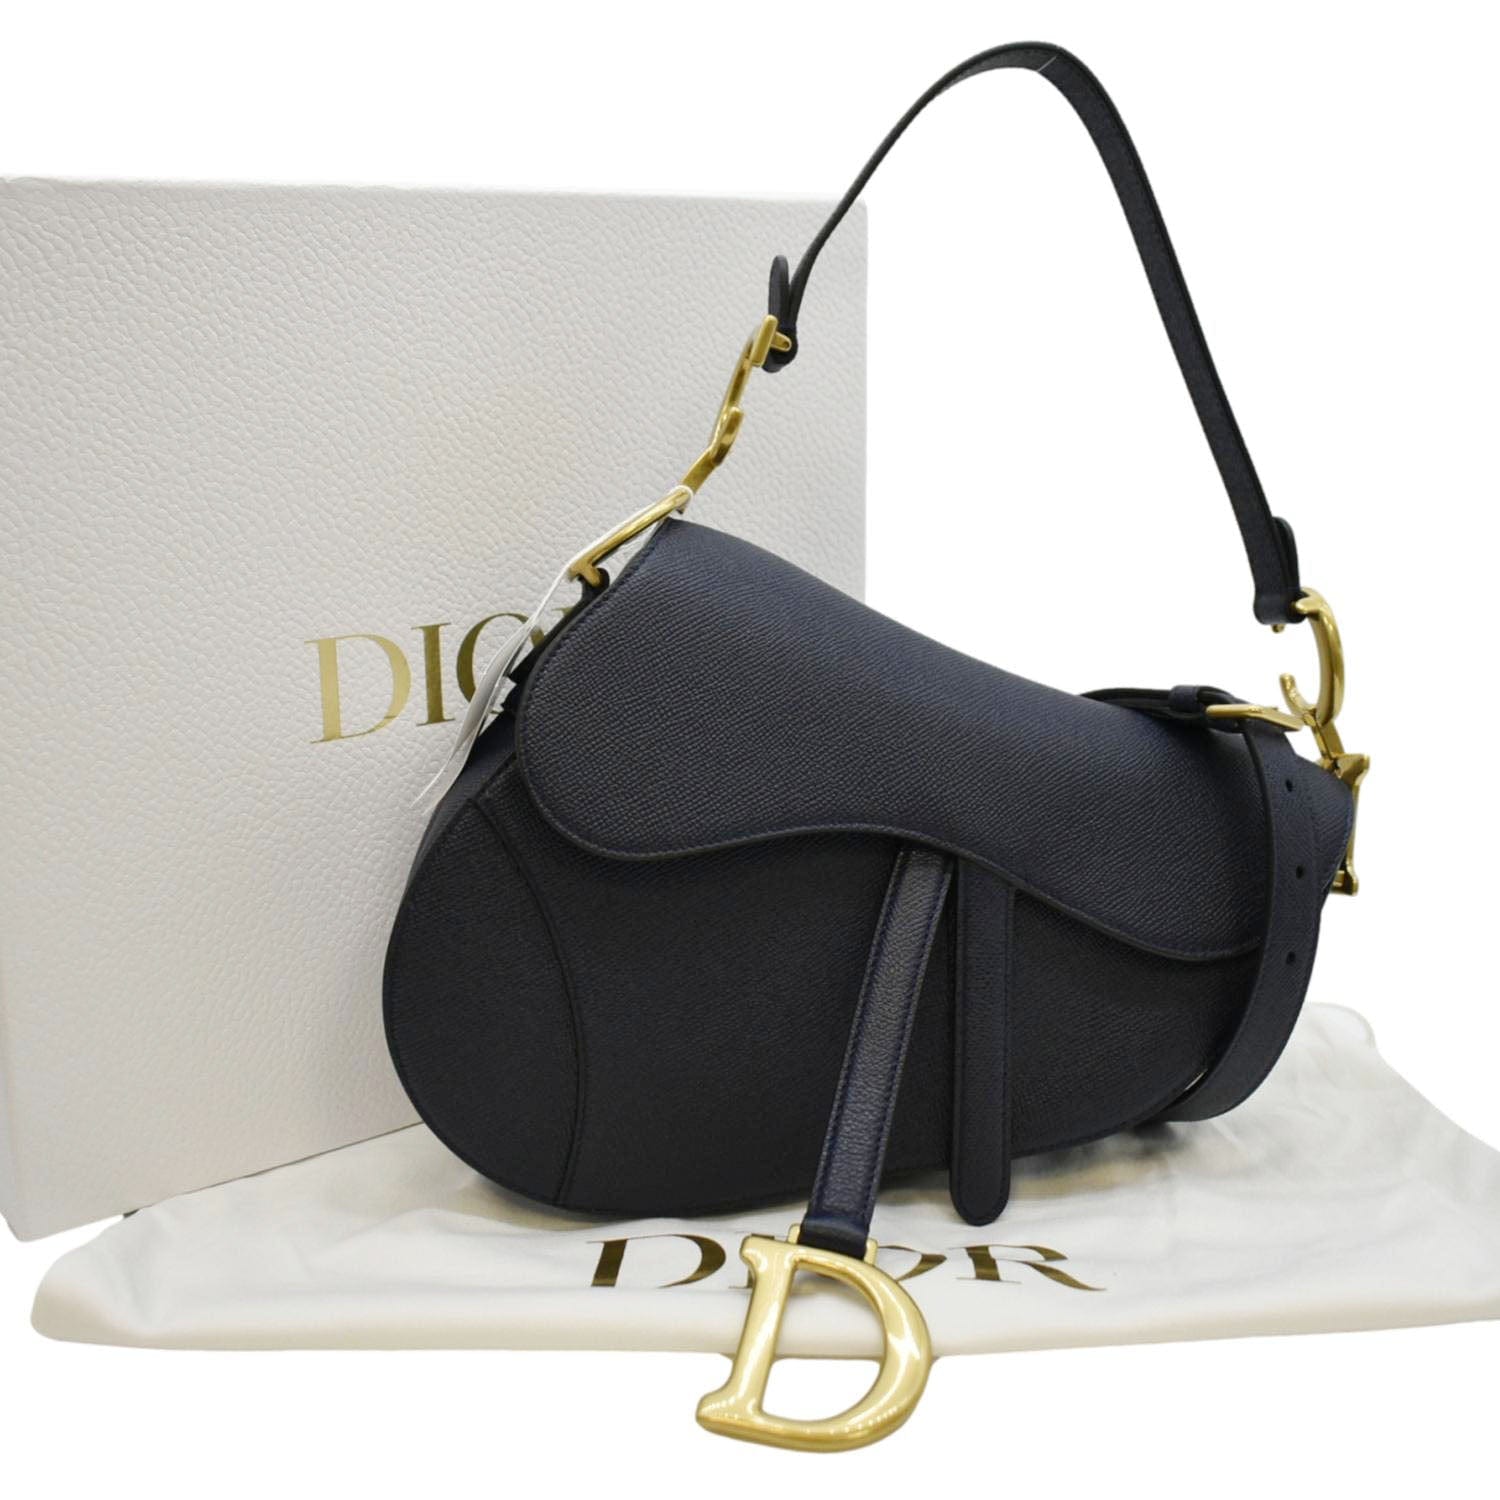 What color is my Dior saddle? : r/handbags